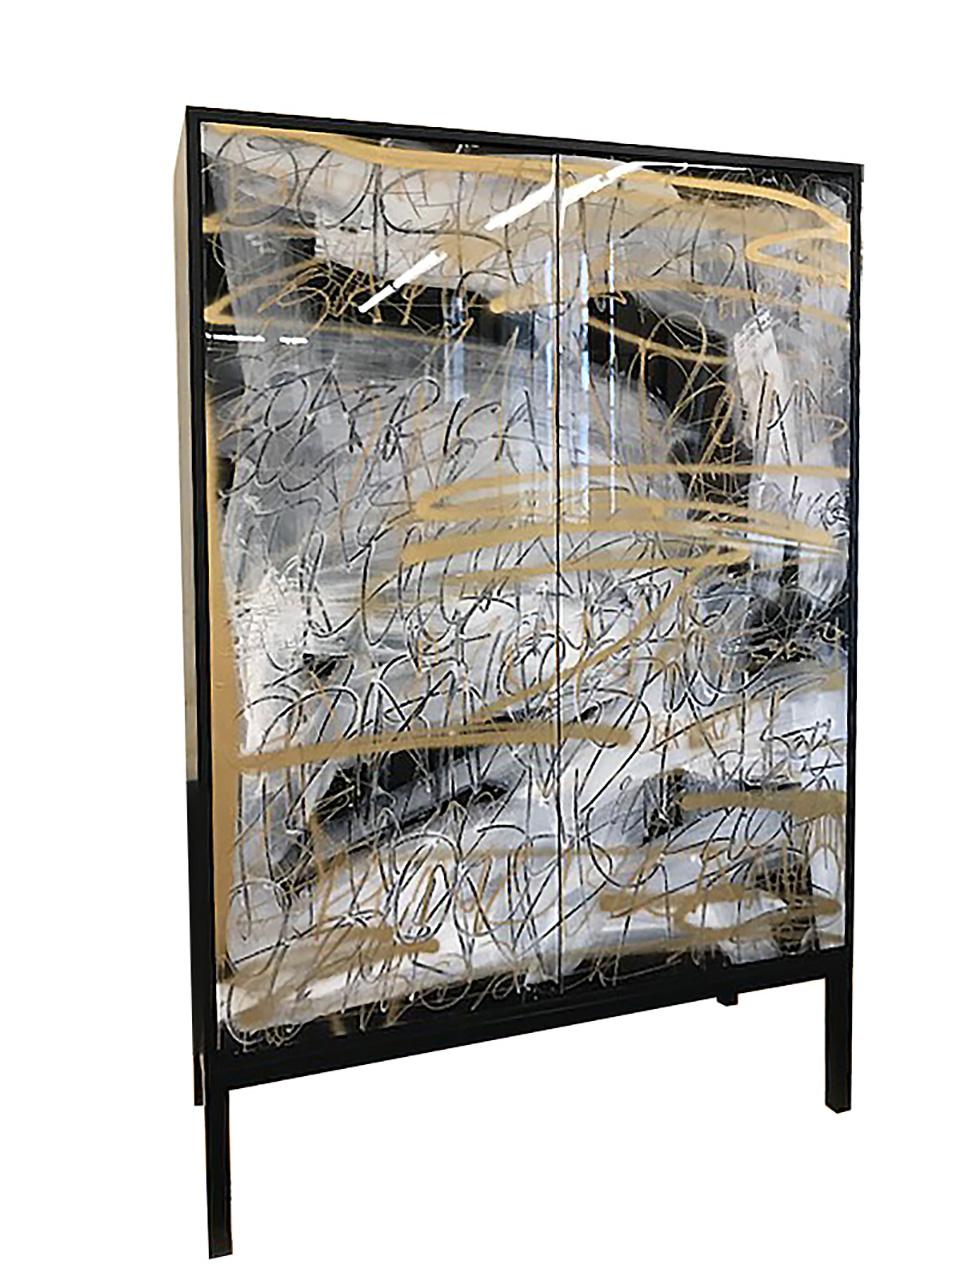 The Hudson Cabinet is designed and finished in our Toronto studio, Morgan Clayhall. The artwork on the doors is created by Murray Duncan

Due to the unique process of creating the artwork and that the client can supply us with words that are